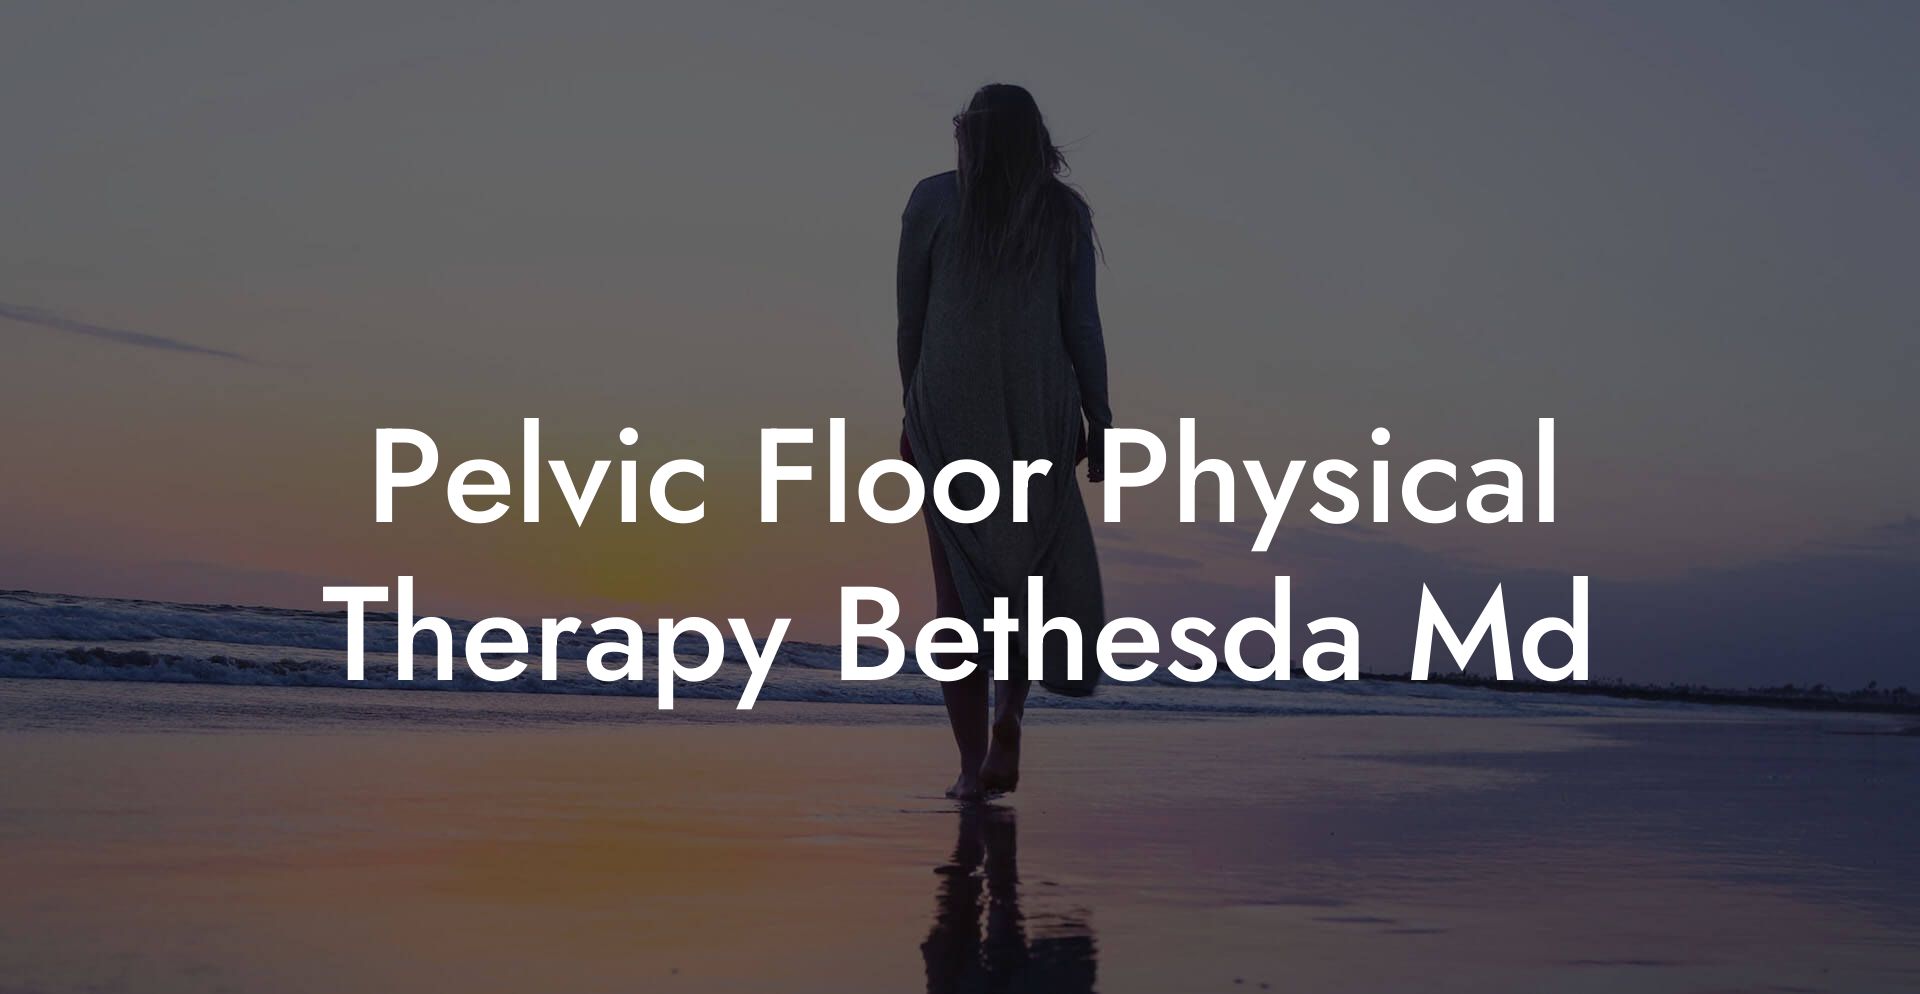 Pelvic Floor Physical Therapy Bethesda Md